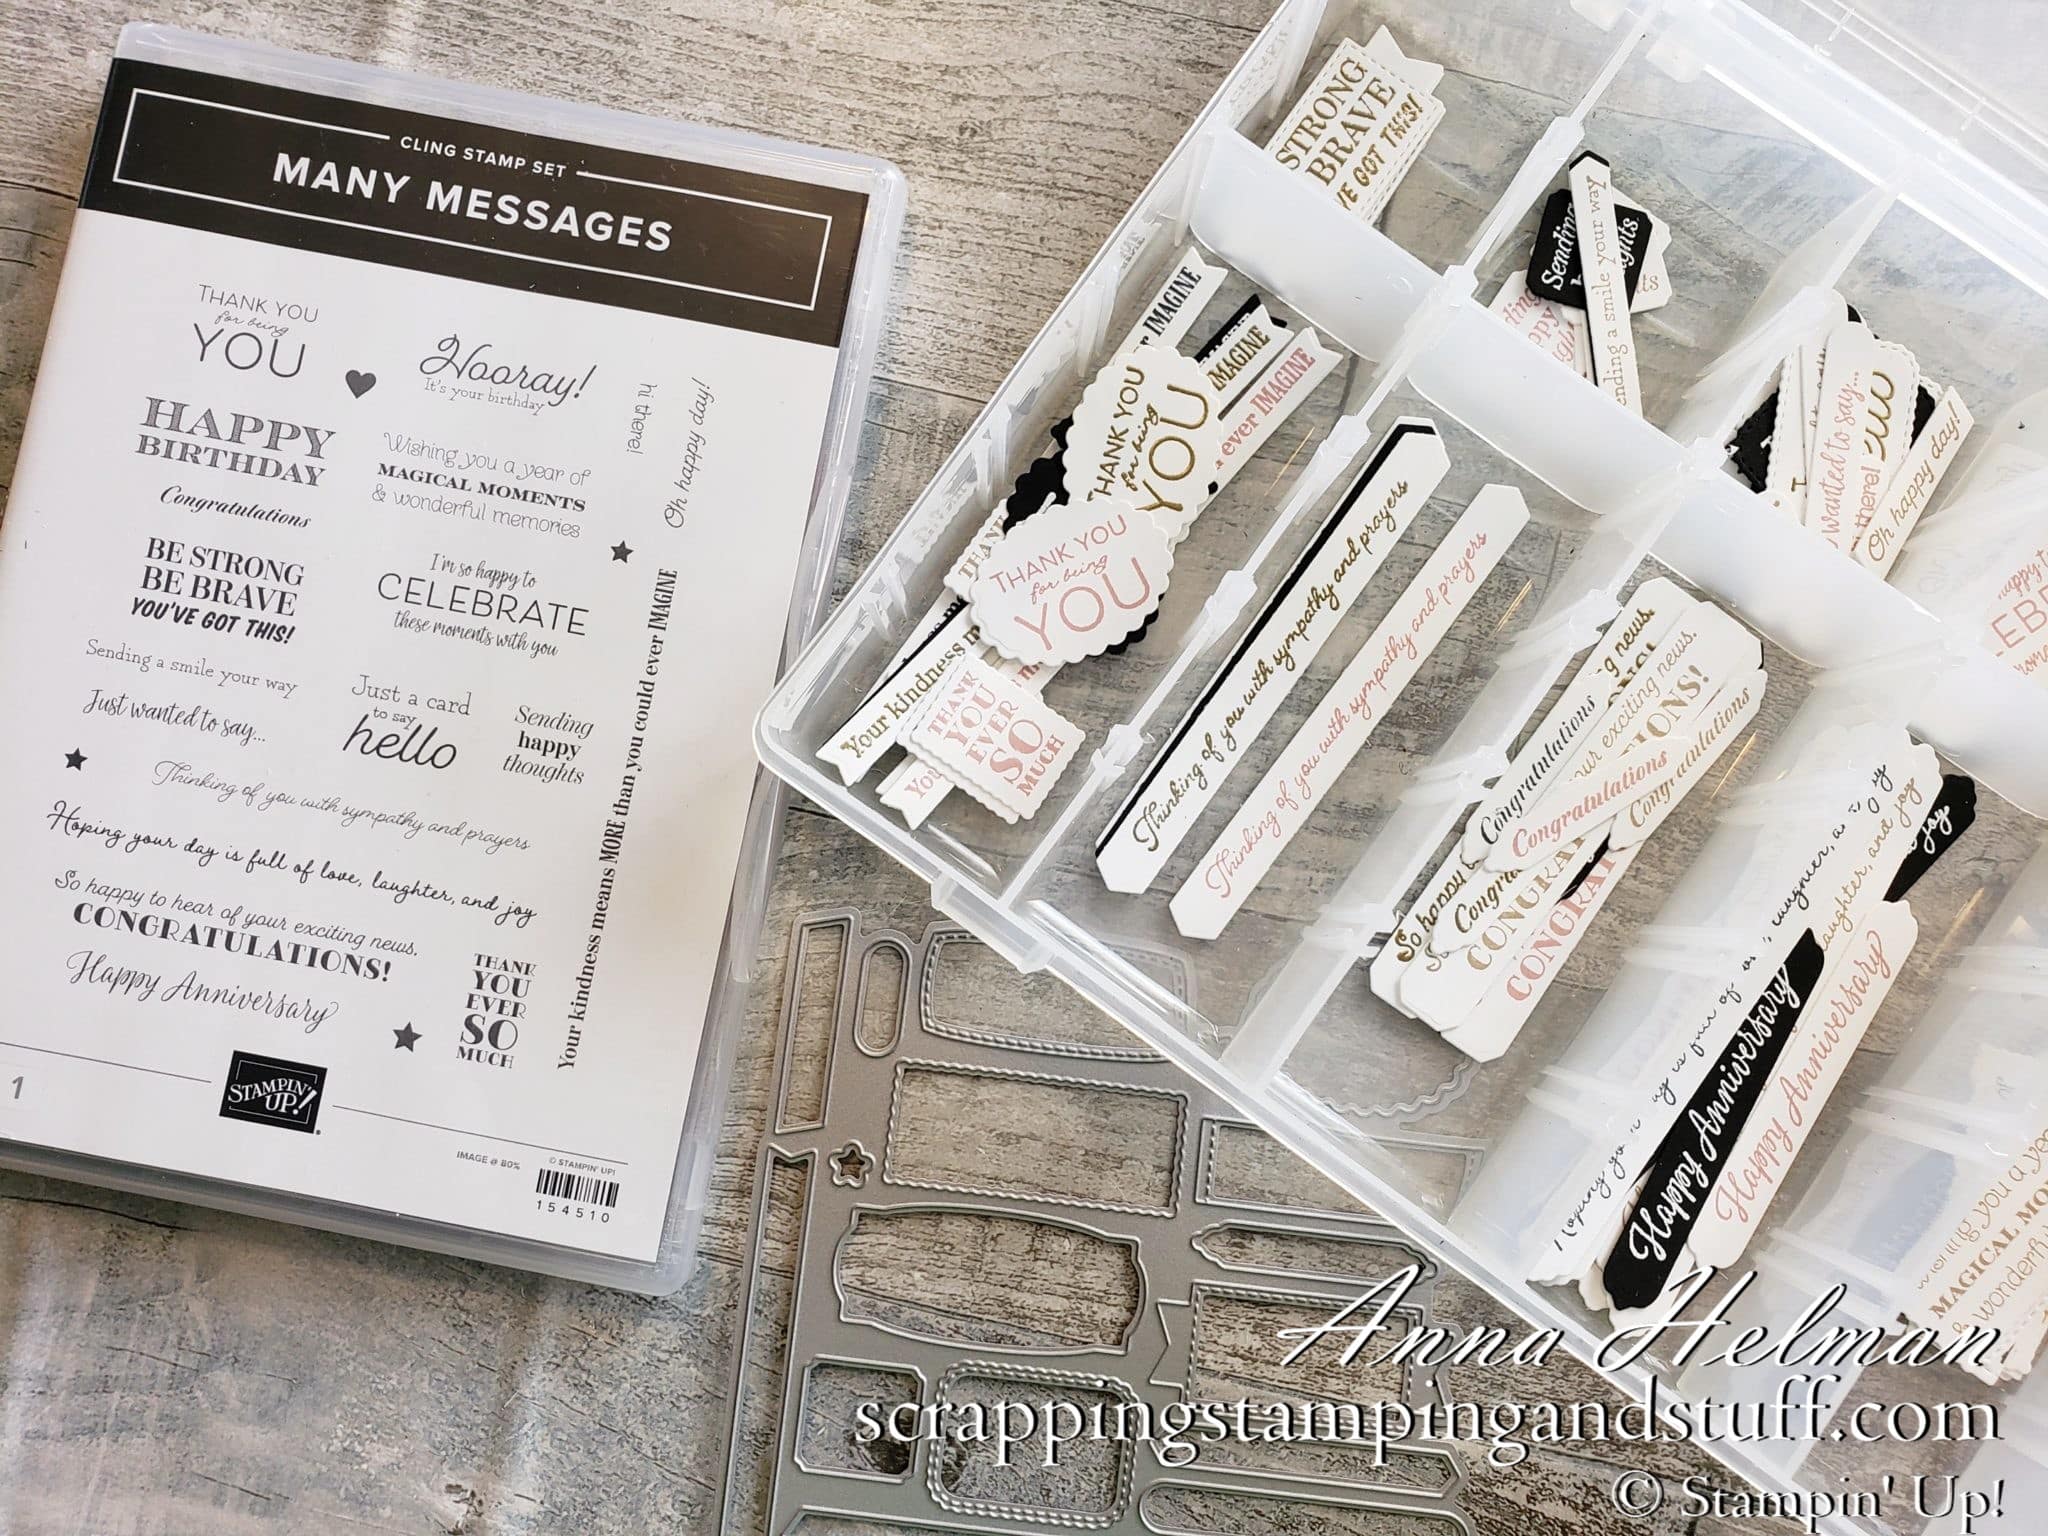 Stampin Up Many Messages Makes Hundreds Of Tags In Minutes!